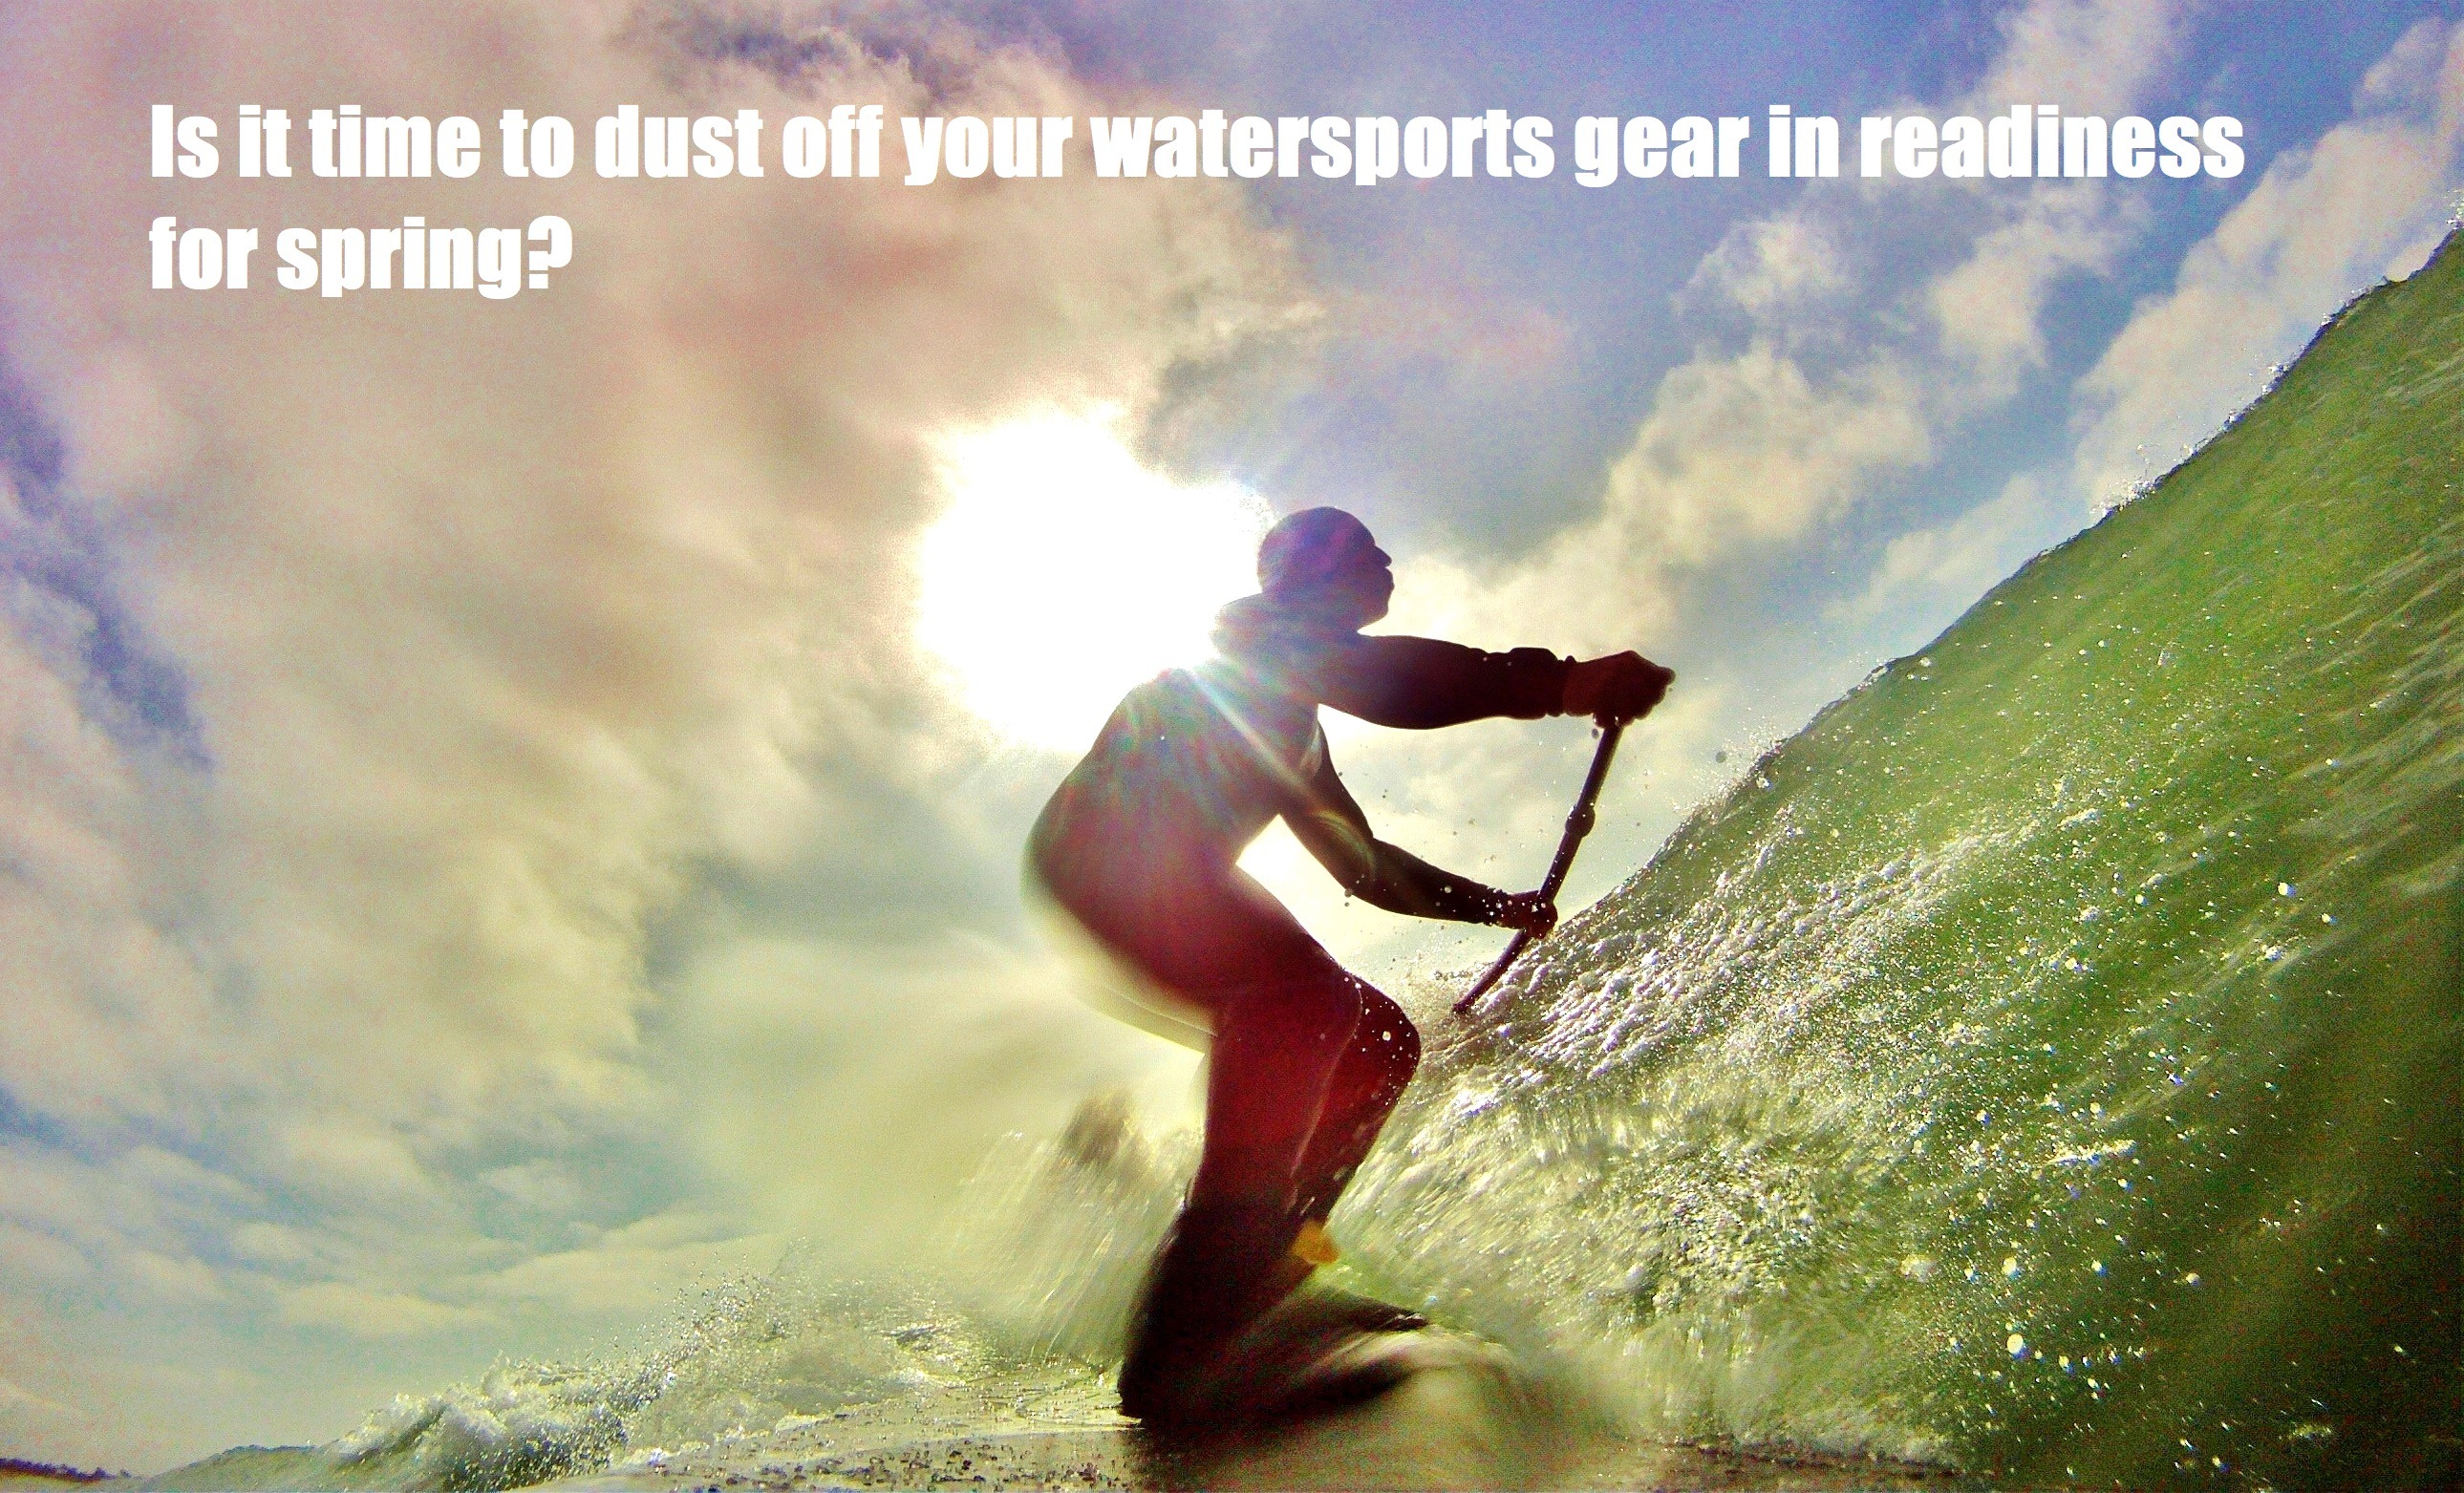 Is it time to dust off your watersports gear in readiness for spring